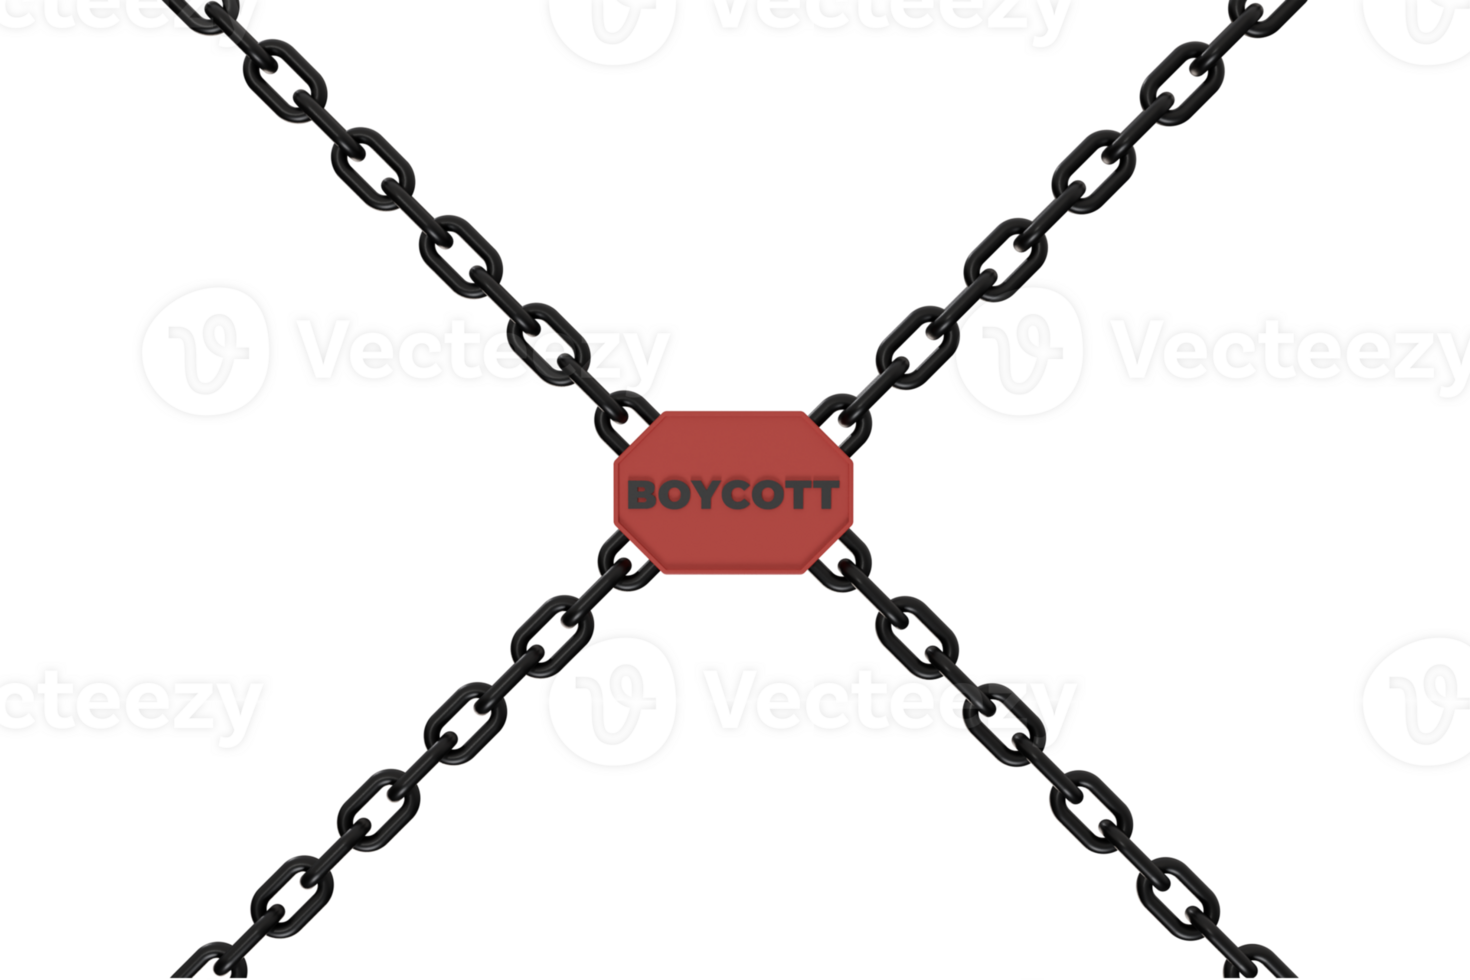 3d render of chain and boycott writing. concept illustration of blocking or prohibiting a product png